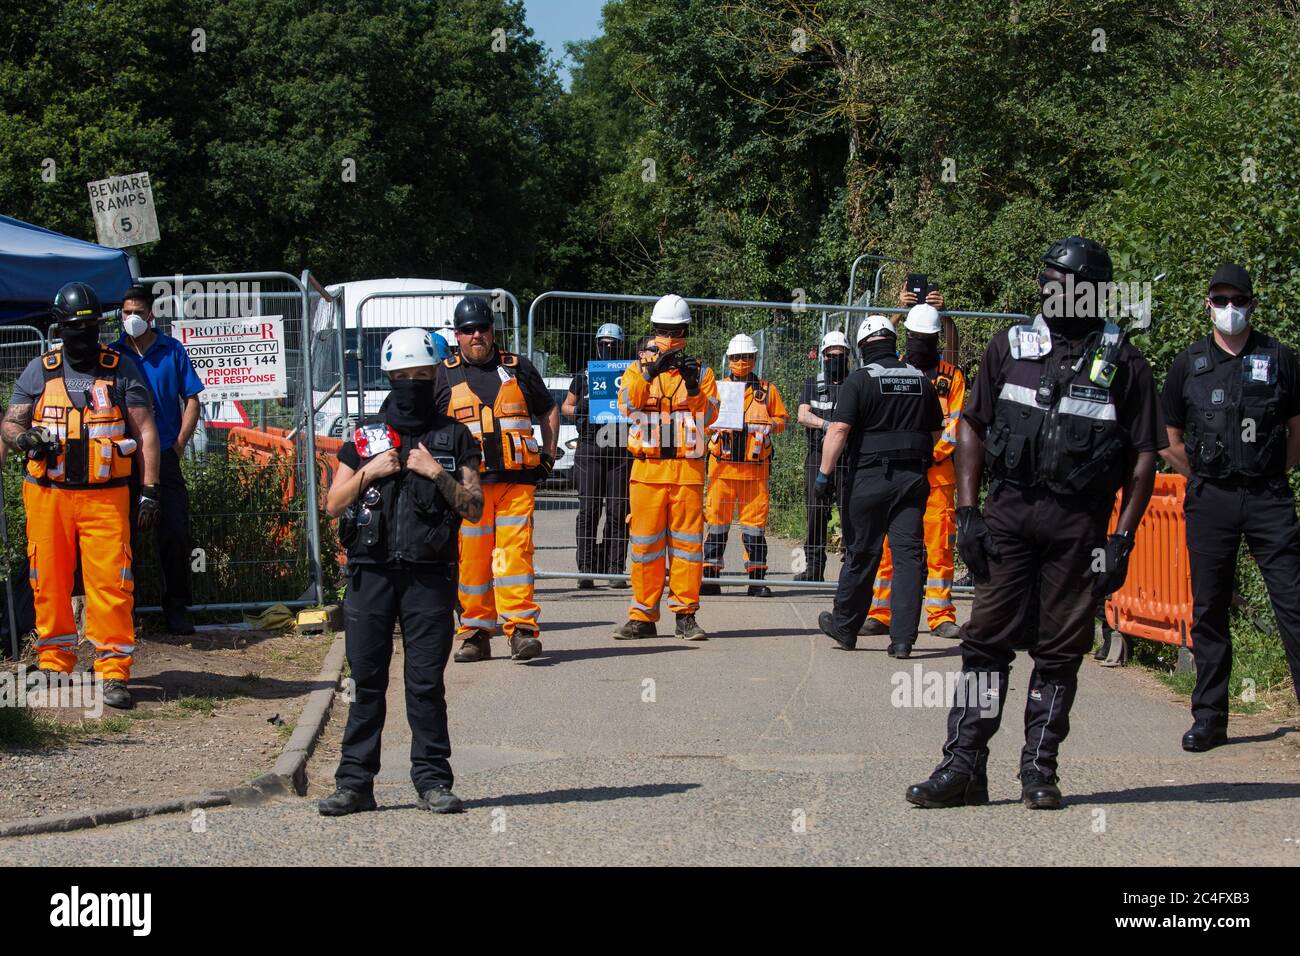 Harefield, UK. 26 June, 2020. HS2 security guards stand in front of a road closure as they observe activists from HS2 Rebellion and Extinction Rebellion UK taking part in a ‘Rebel Trail’ hike along the route of the HS2 high-speed rail link. The activists, who departed from Birmingham on 20th June and will arrive outside Parliament in London on 27th June, are protesting against the environmental impact of the high-speed rail link and questioning the viability of the £100bn+ project. Credit: Mark Kerrison/Alamy Live News Stock Photo